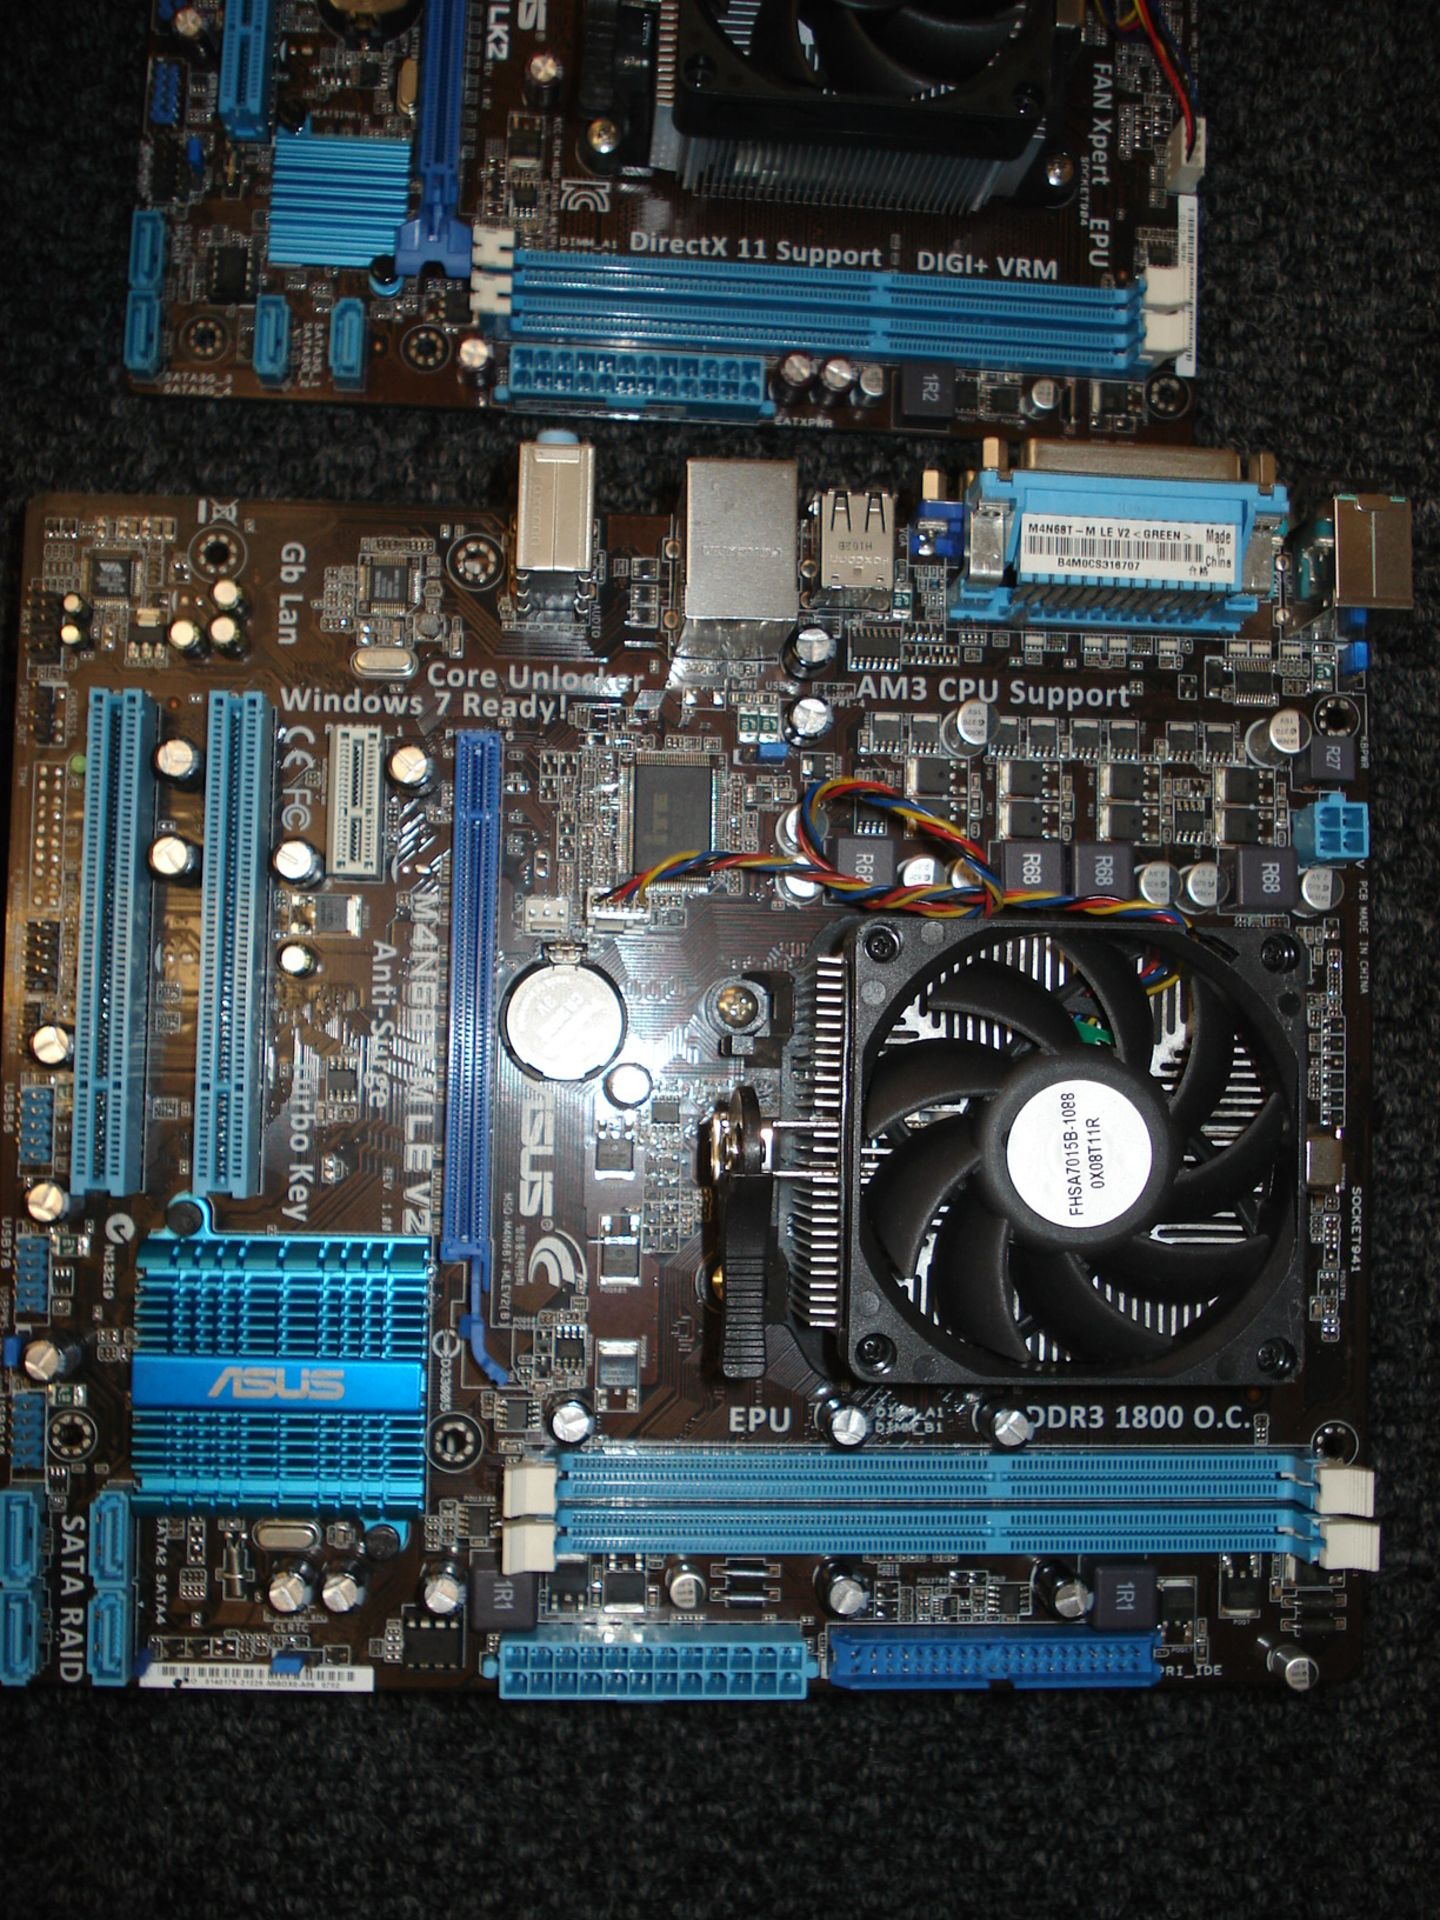 ASUS Boards - M4N68T-M LE V2 - QTY 2, M4N68T-M V2 - QTY 1, M5A7BL-M LE QTY 2, AM3 + CPU SUPPORT - - Image 8 of 12